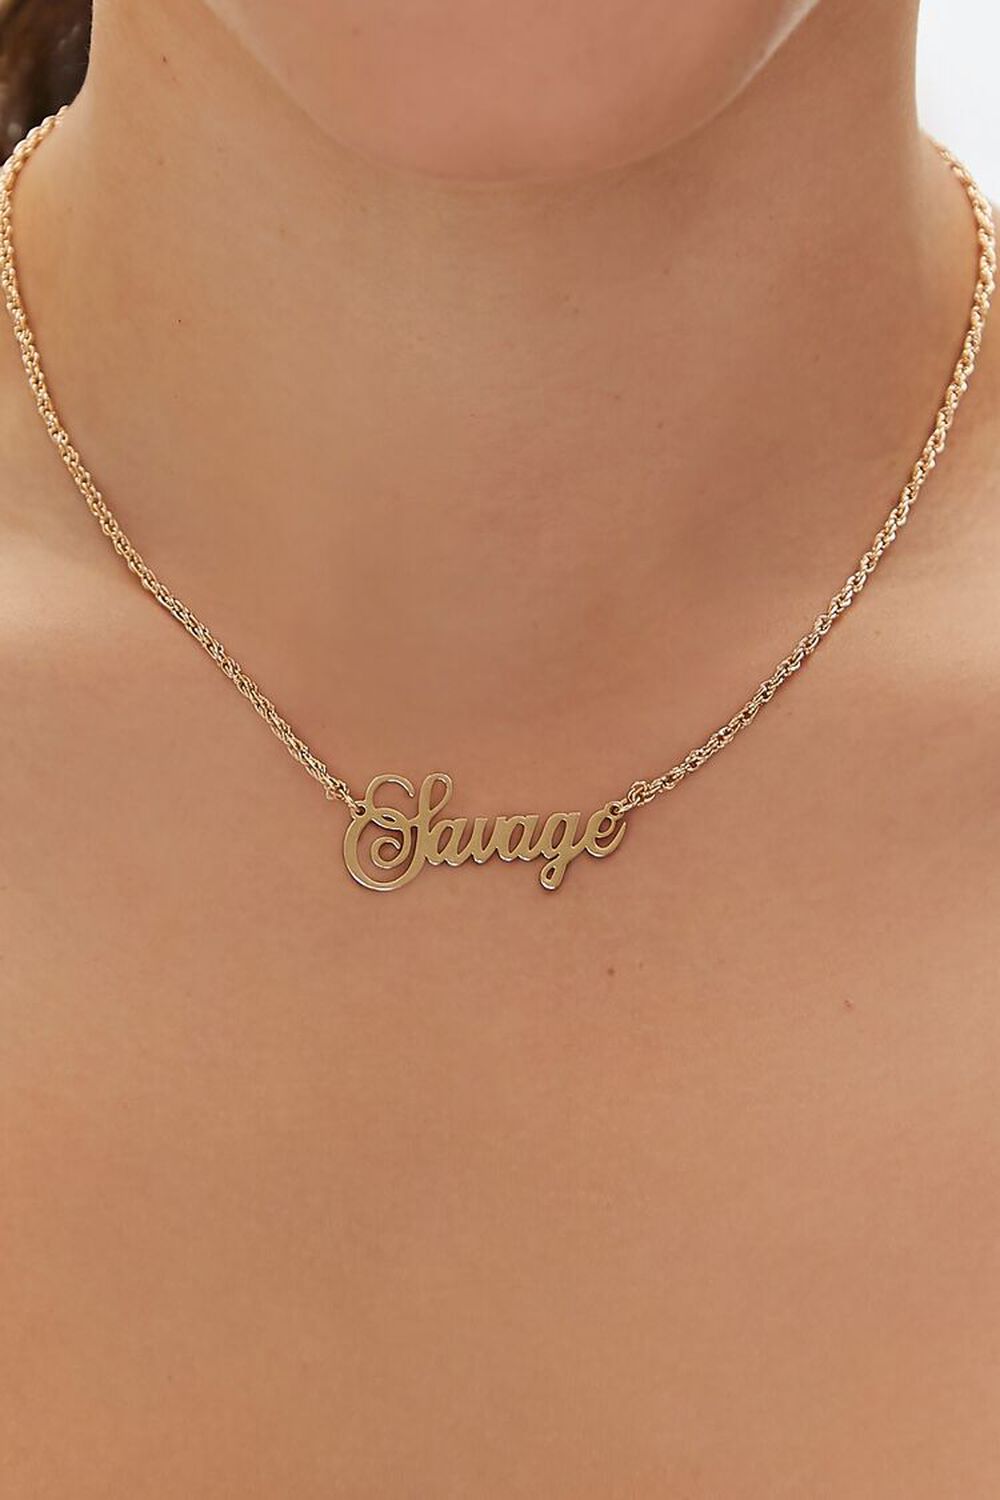 GOLD Savage Nameplate Chain Necklace, image 1